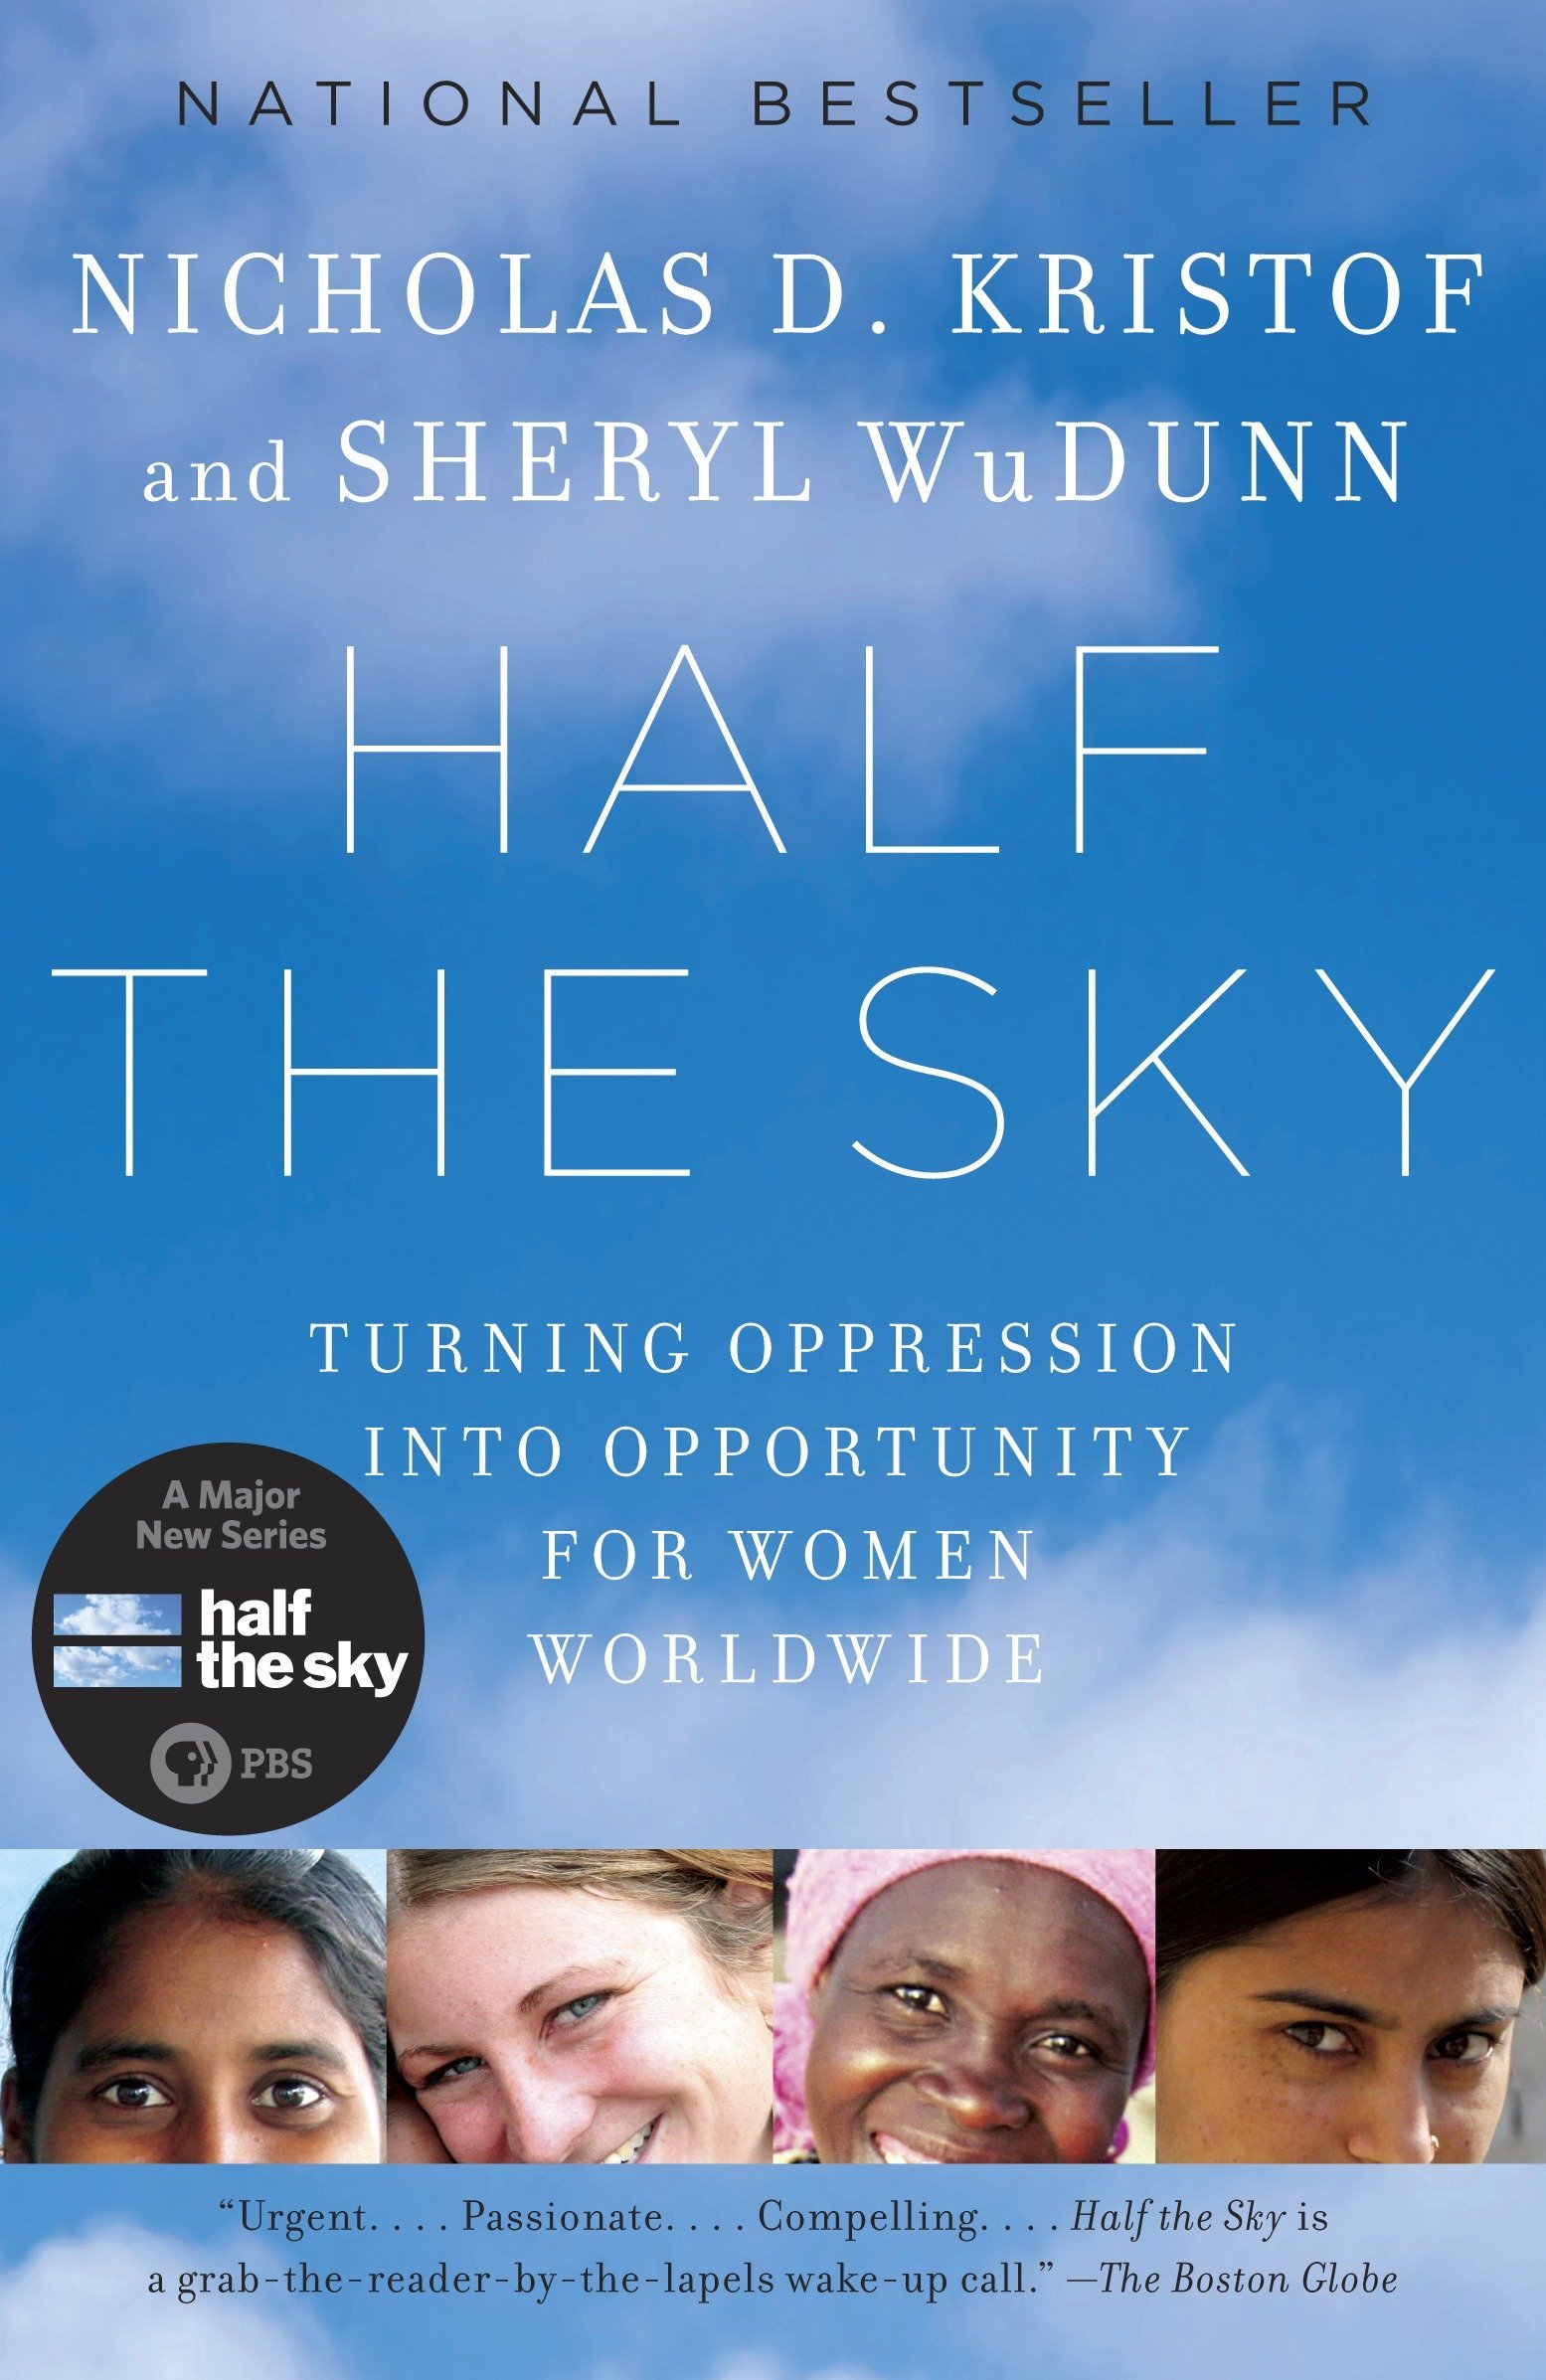 half the sky: turning oppression into opportunity for women worldwide by nicholas d. kristof and sheryl WuDunn